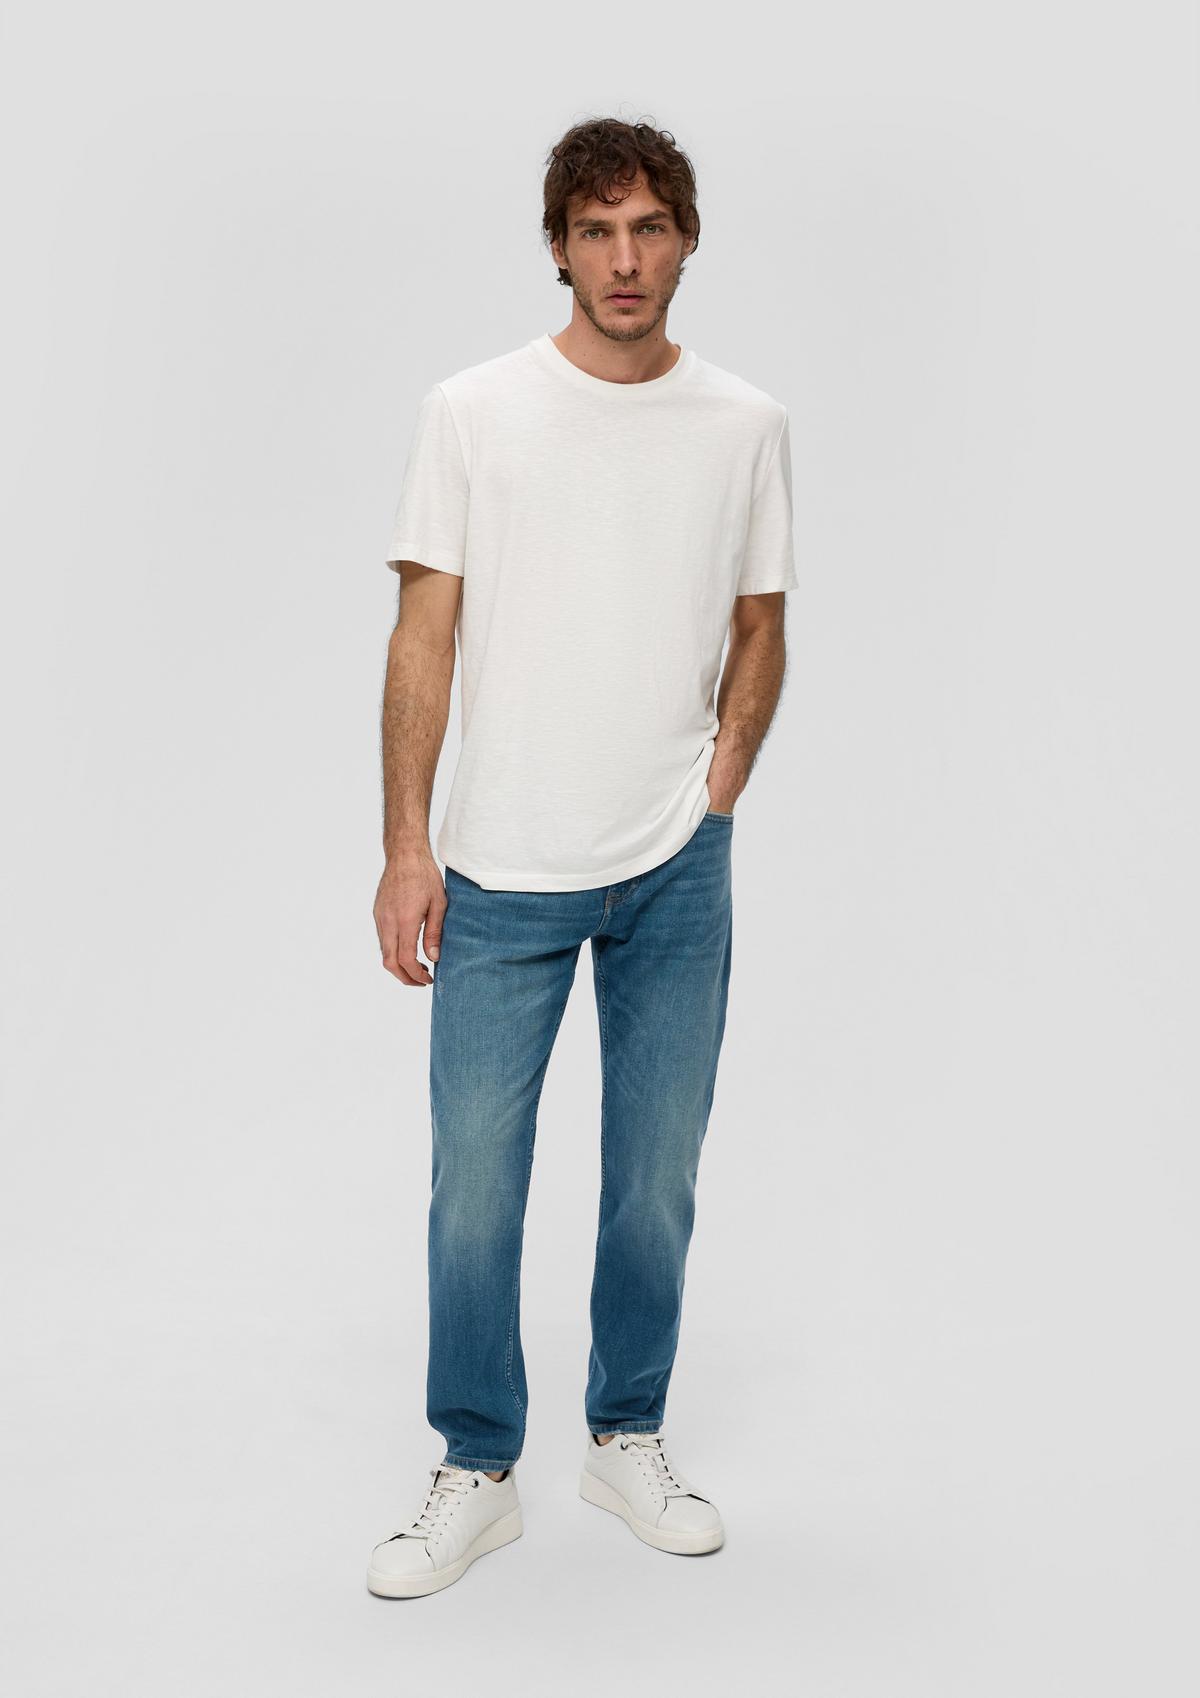 Mauro jeans / regular fit / high-waisted / tapered leg